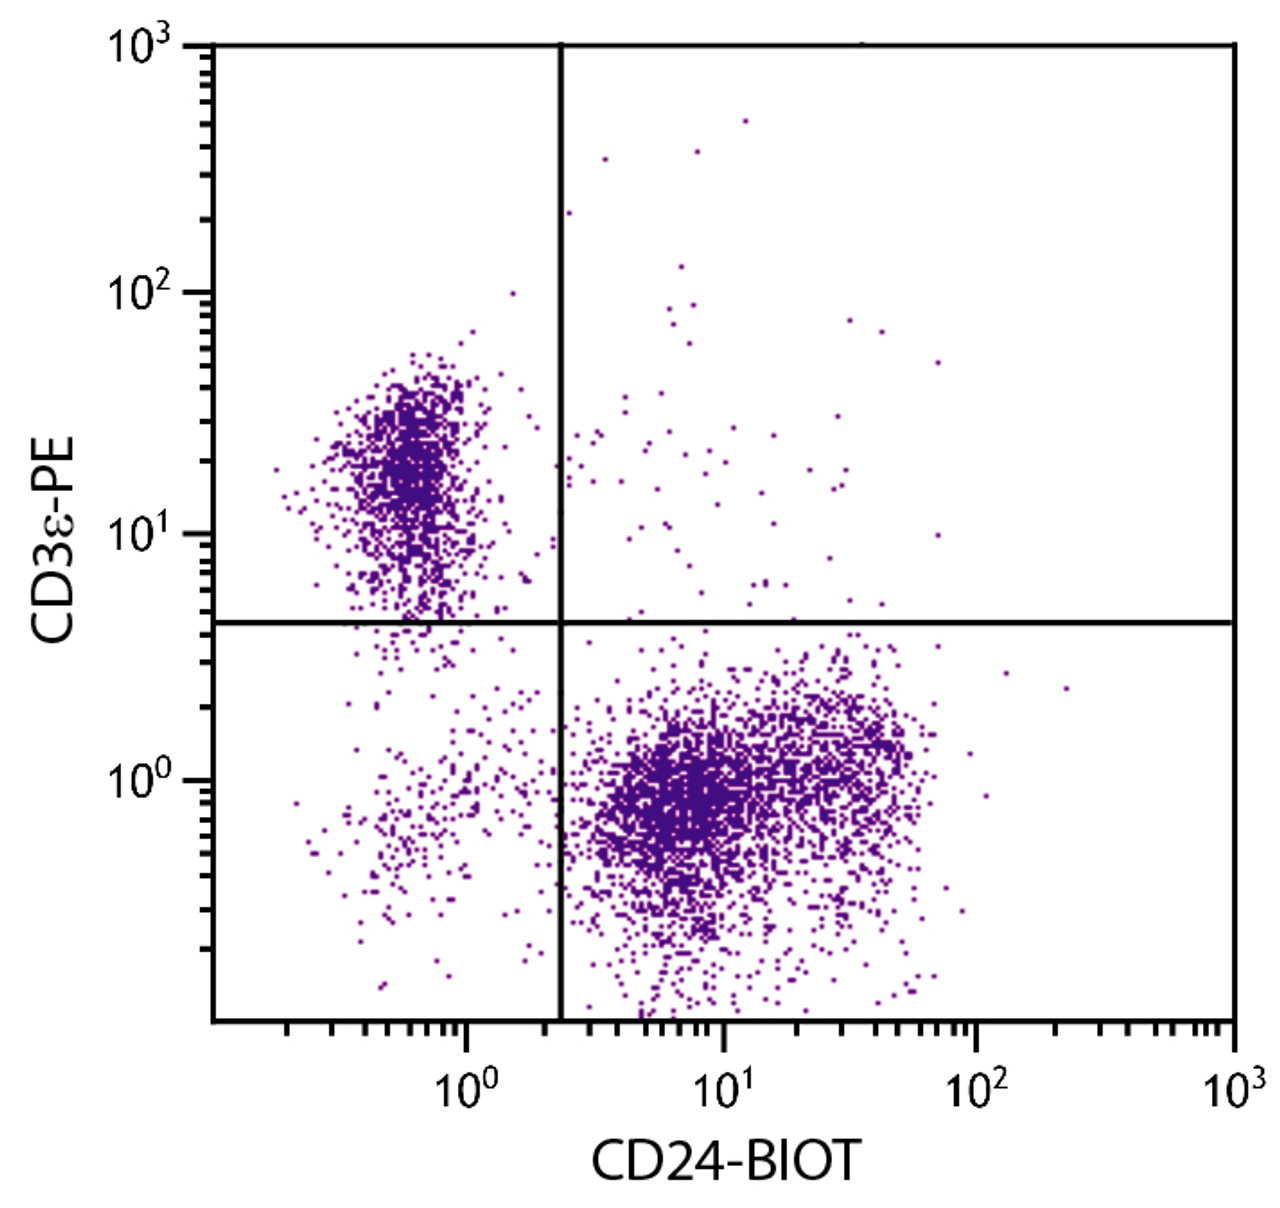 C57BL/6 mouse splenocytes were stained with Rat Anti-Mouse CD24-BIOT (Cat. No. 98-692) and Rat Anti-Mouse CD3?-PE followed by Streptavidin-FITC .